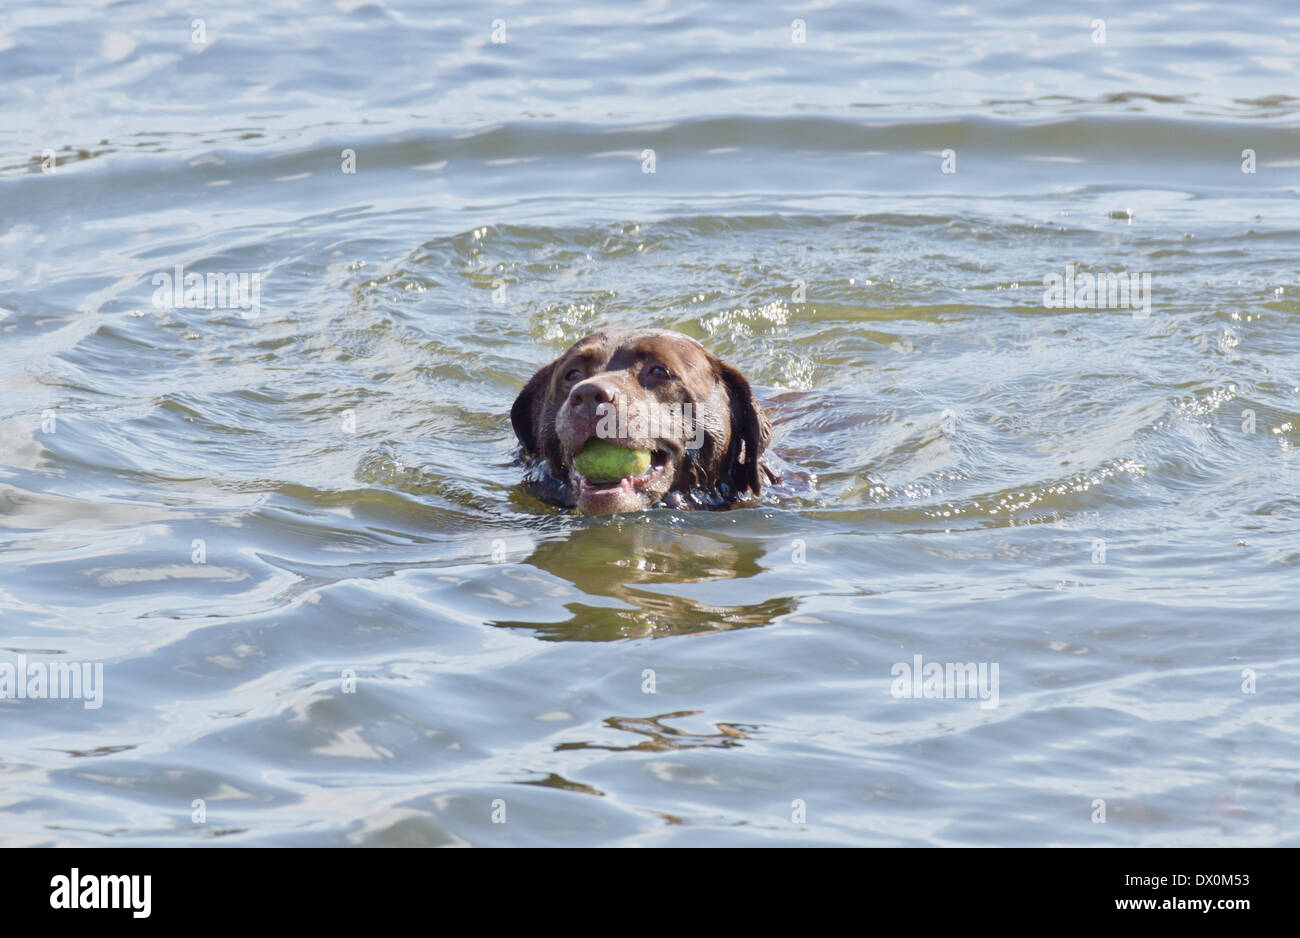 A brown Labrador dog fetching a ball in water Stock Photo